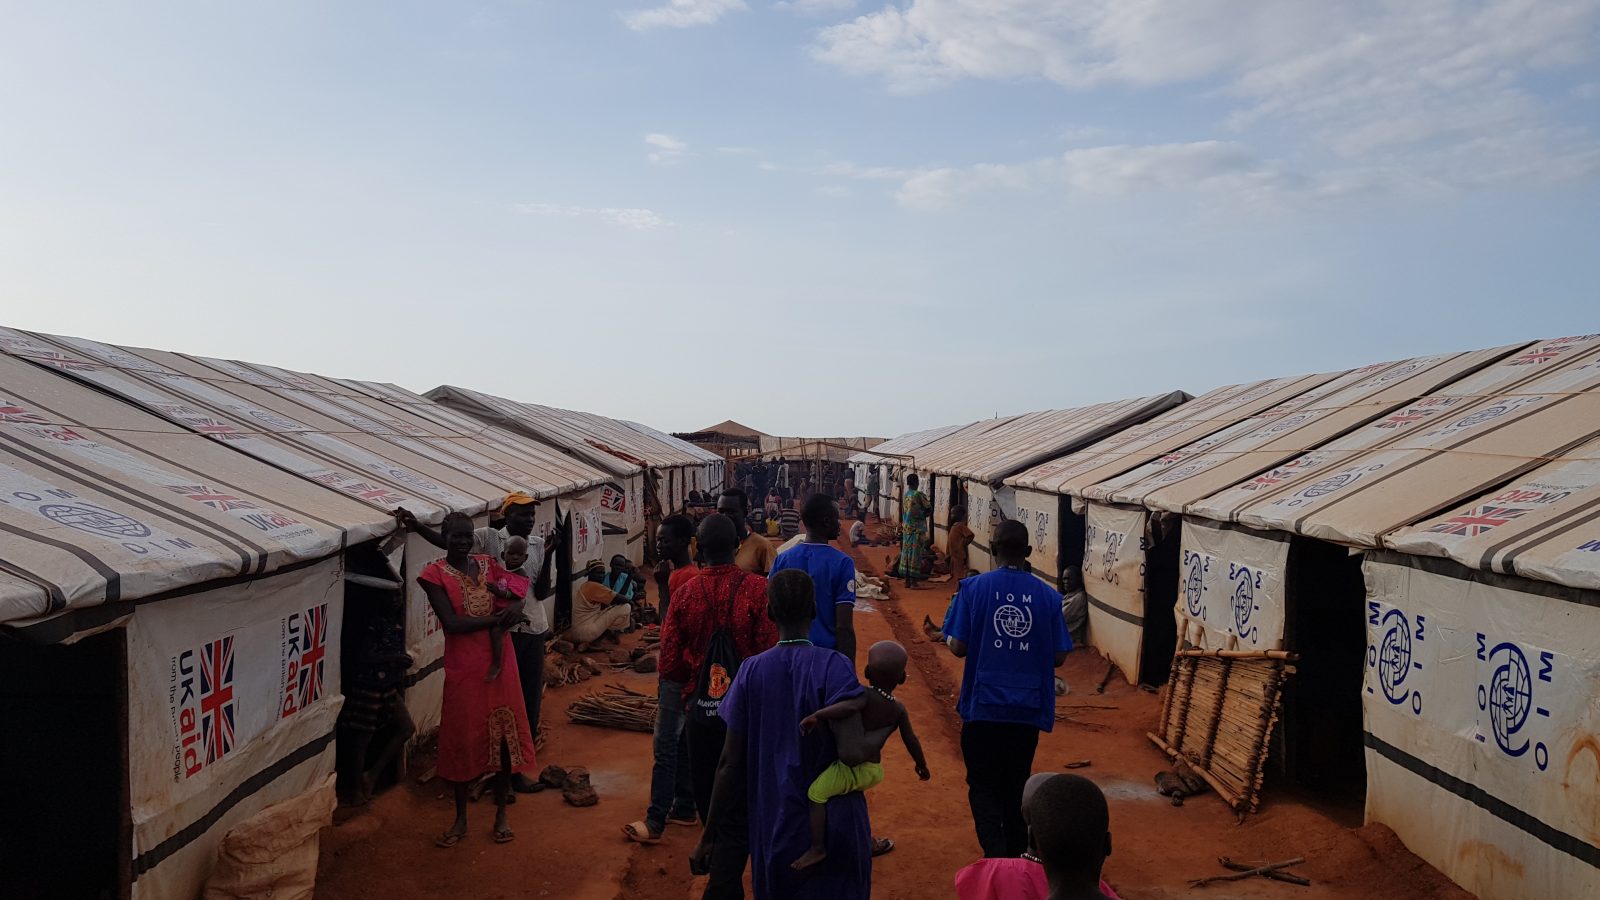 People walk through a refugee camp in South Sudan.